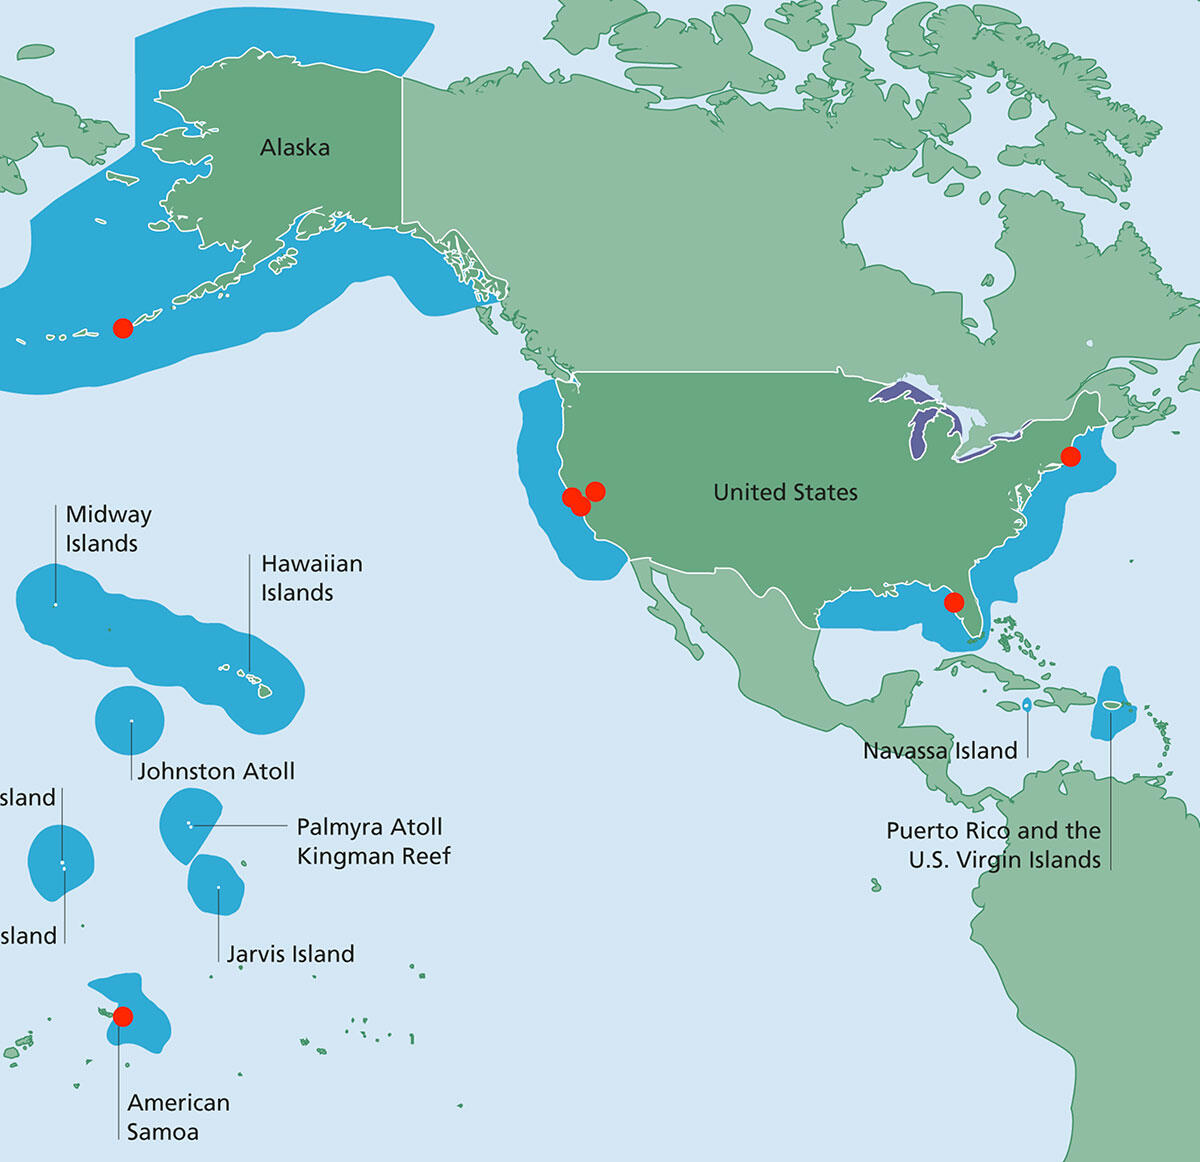 Map shows North America plus Caribbean and Pacific Ocean islands with dots placed in field study locations.